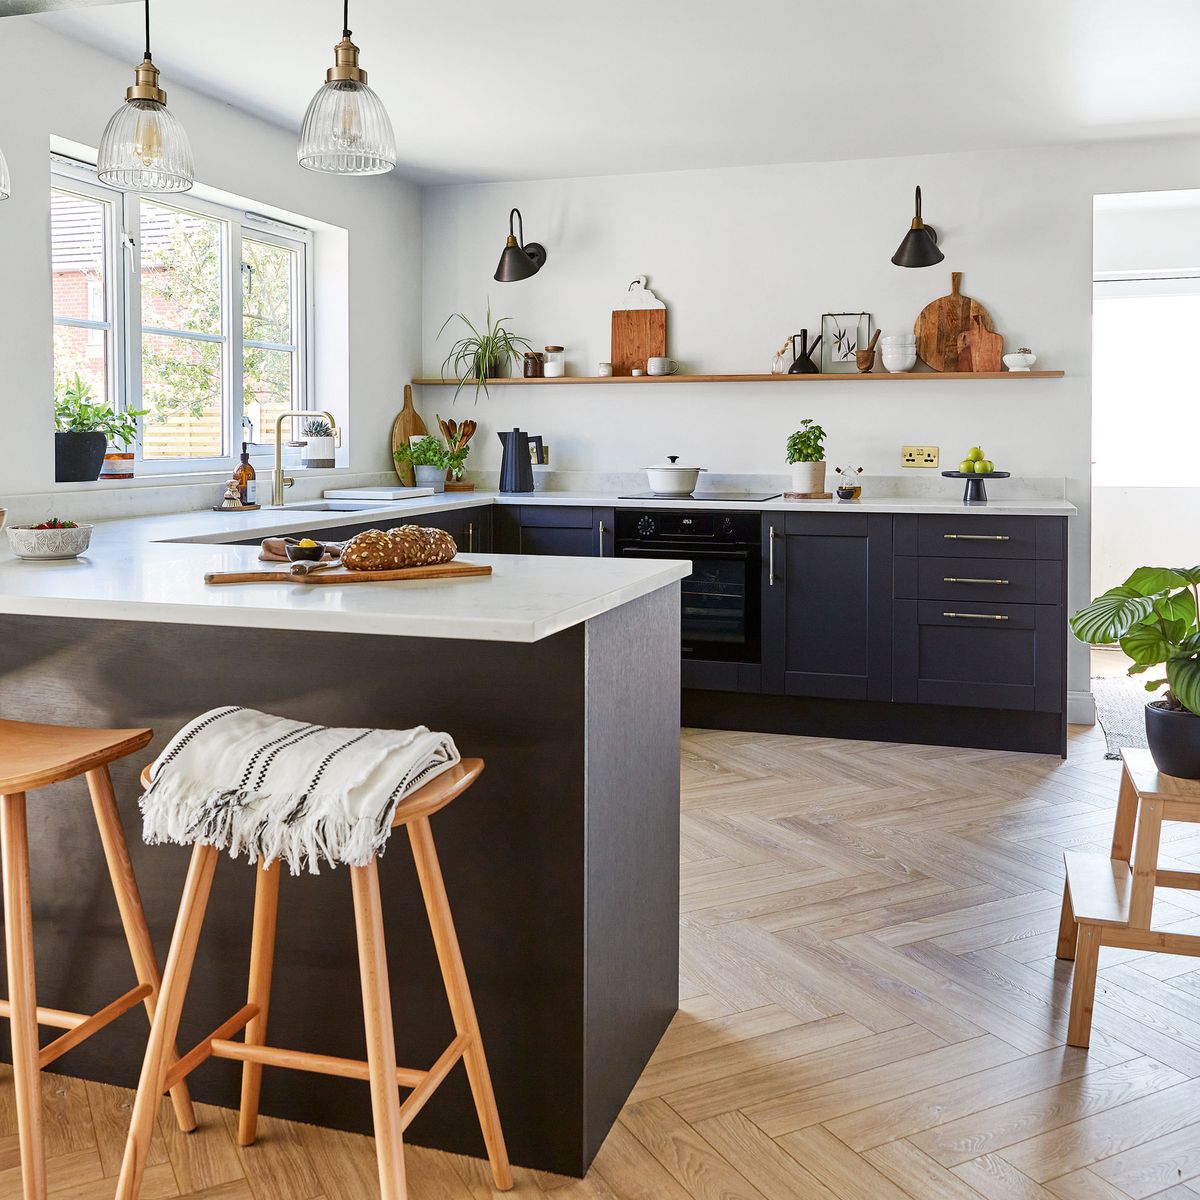 5 things interior designers say you should remove from your kitchen to make it feel bigger